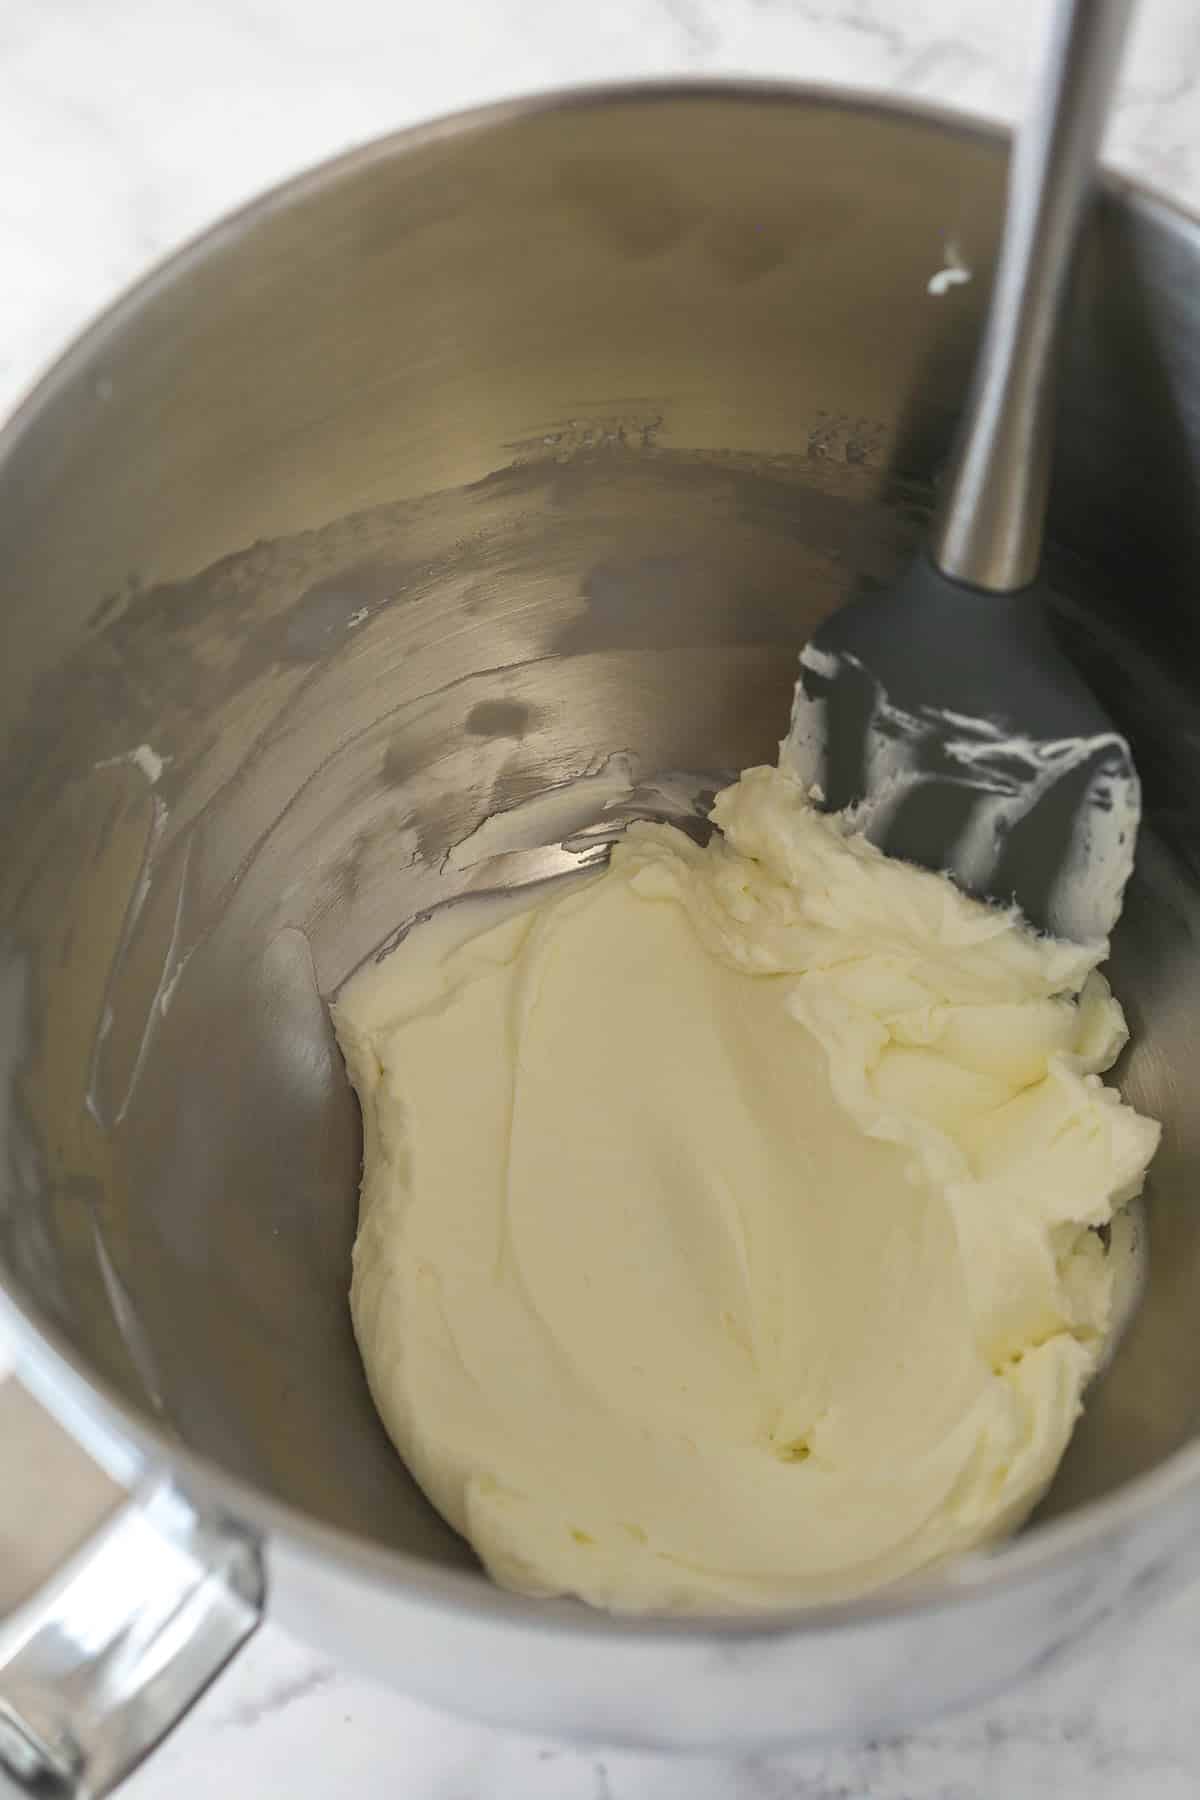 Cream cheese in a mixing bowl that has been whipped until smooth and creamy.